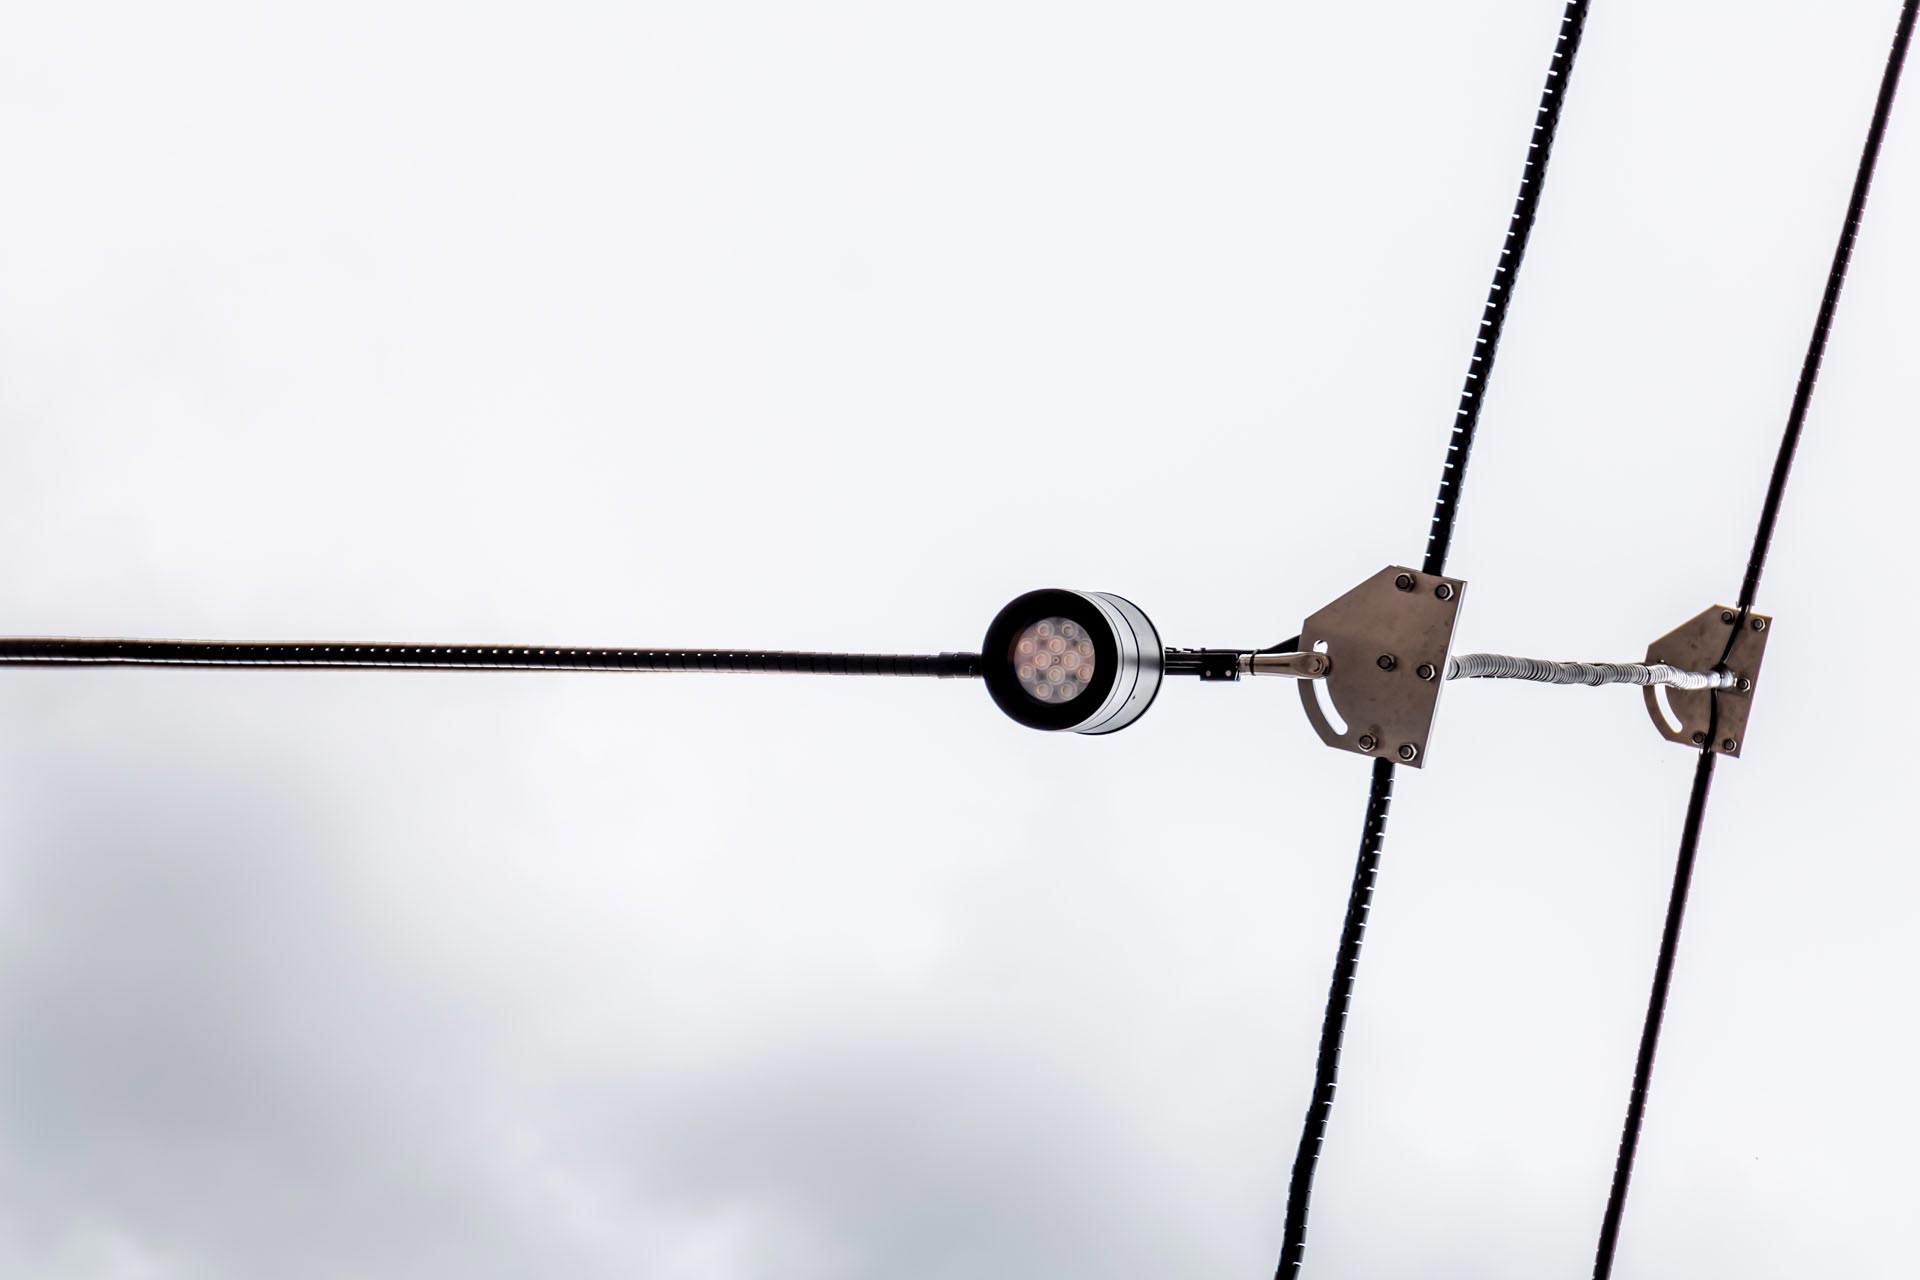 Detail of a LED lamp hanging on a cable suspension by Jakob